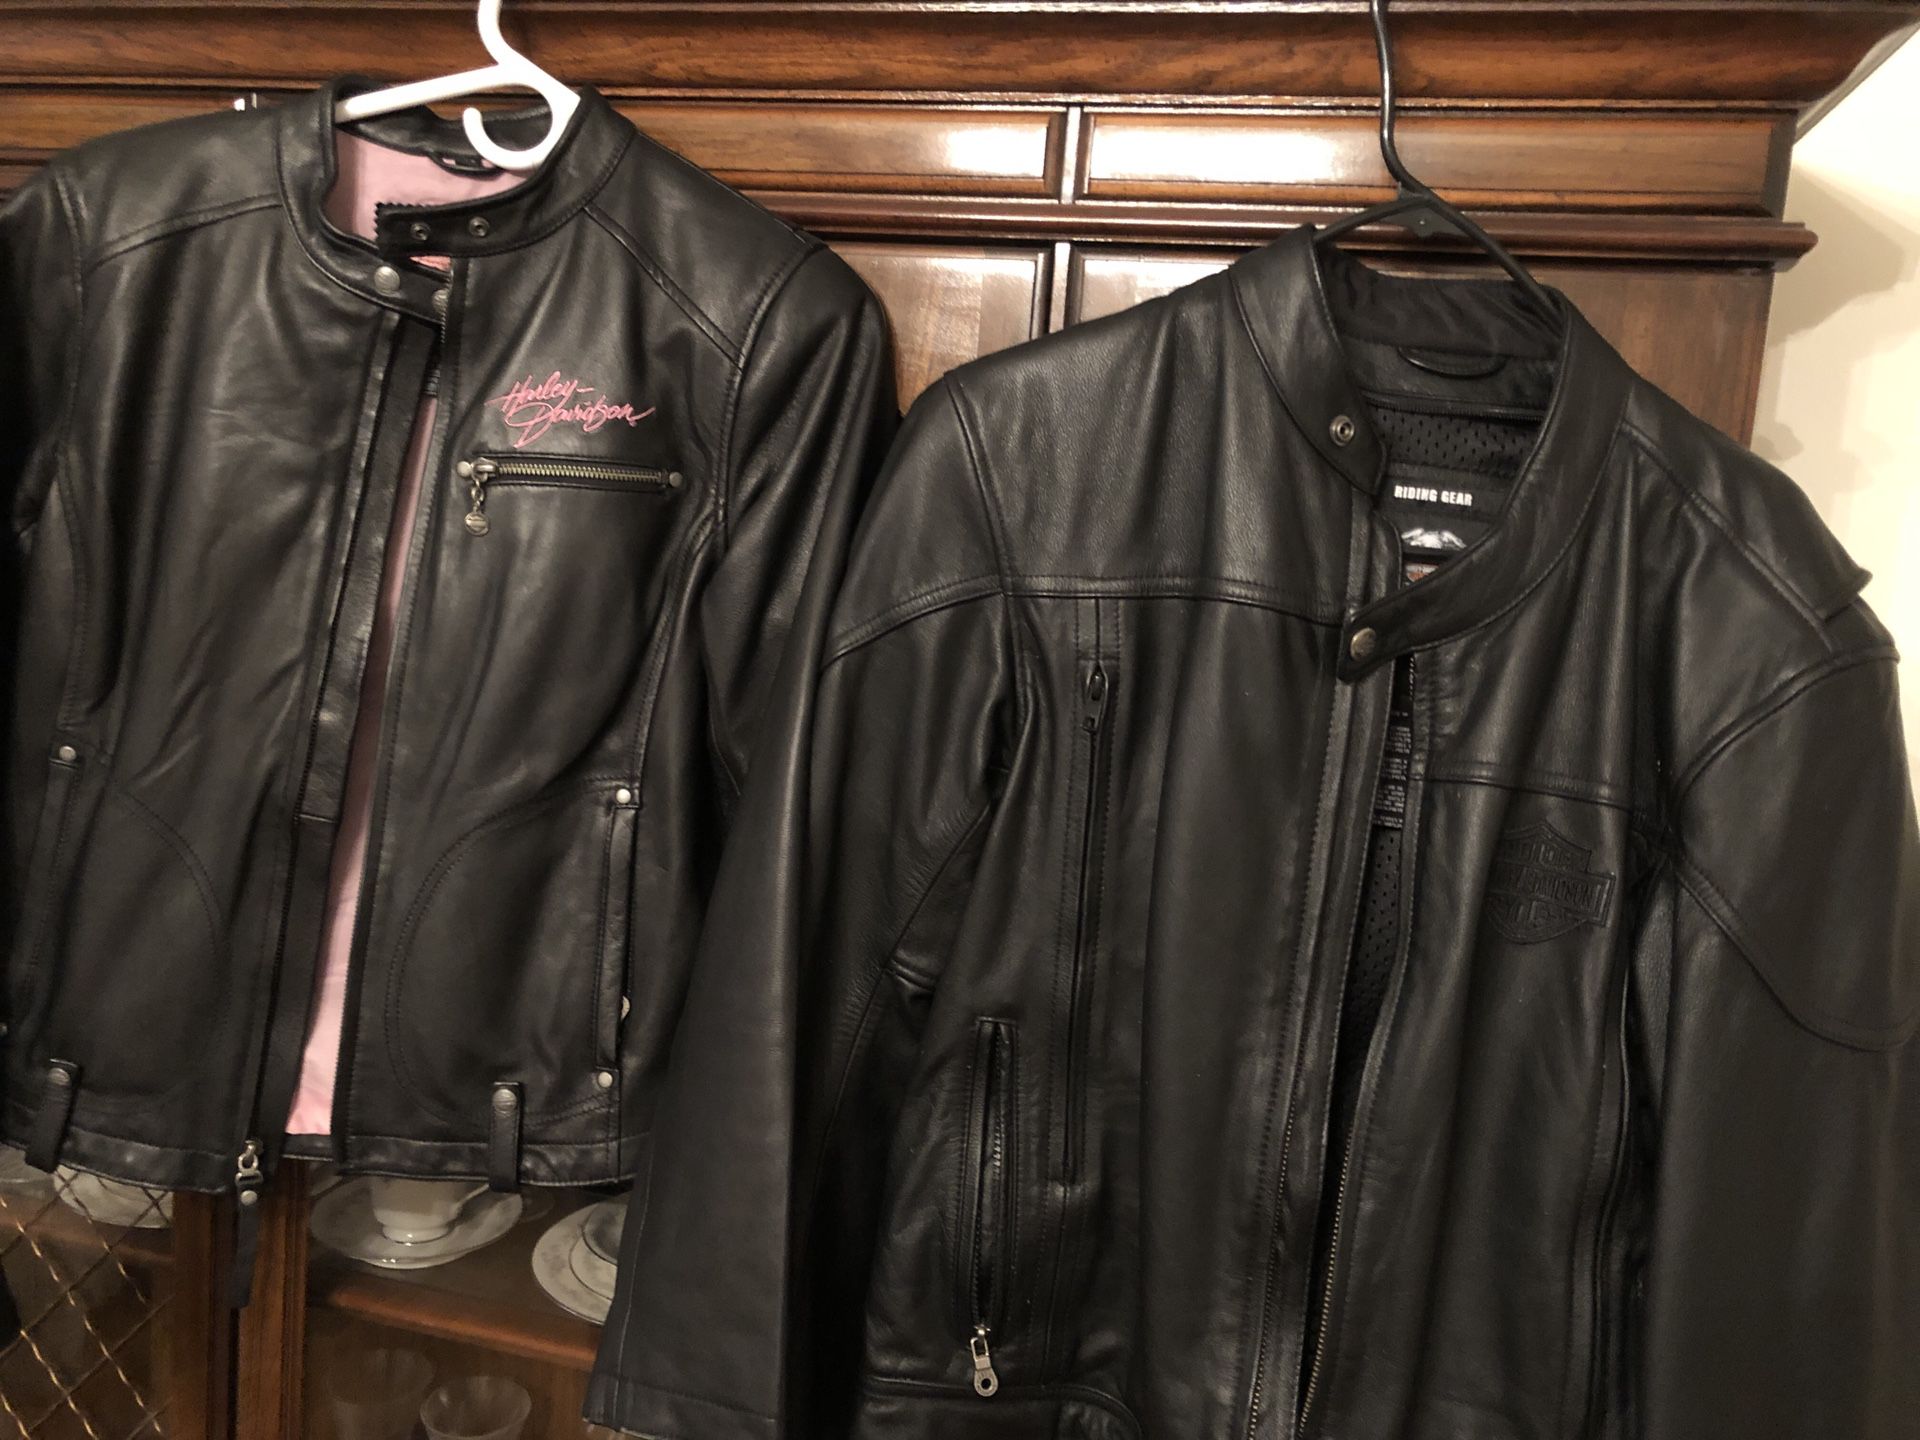 His and her Harley Davidson jackets